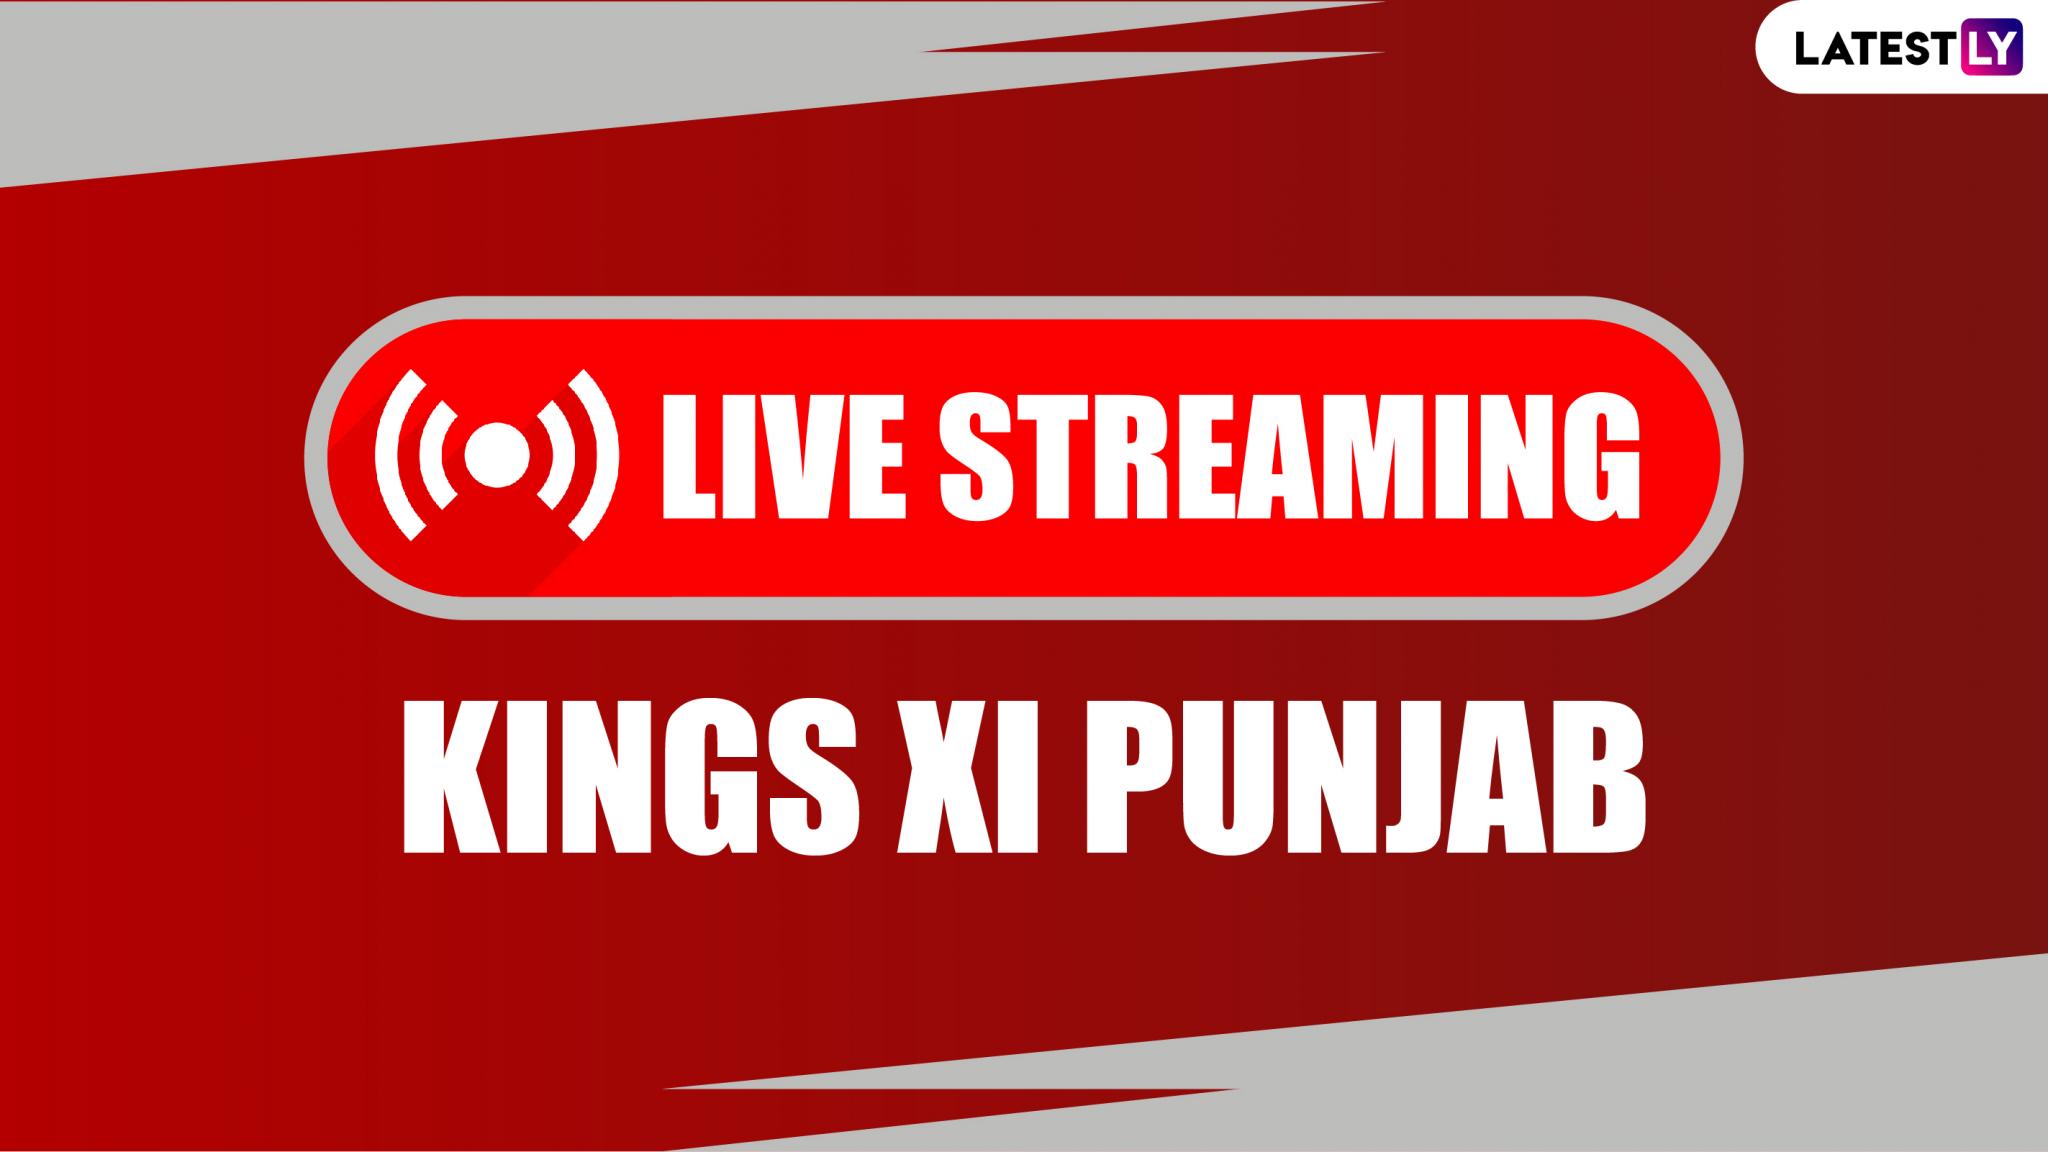 Cricket News Dream11 IPL 2020 Live Streaming Online and Telecast of KXIP Matches on Star Sports 1 Hindi 🏏 LatestLY